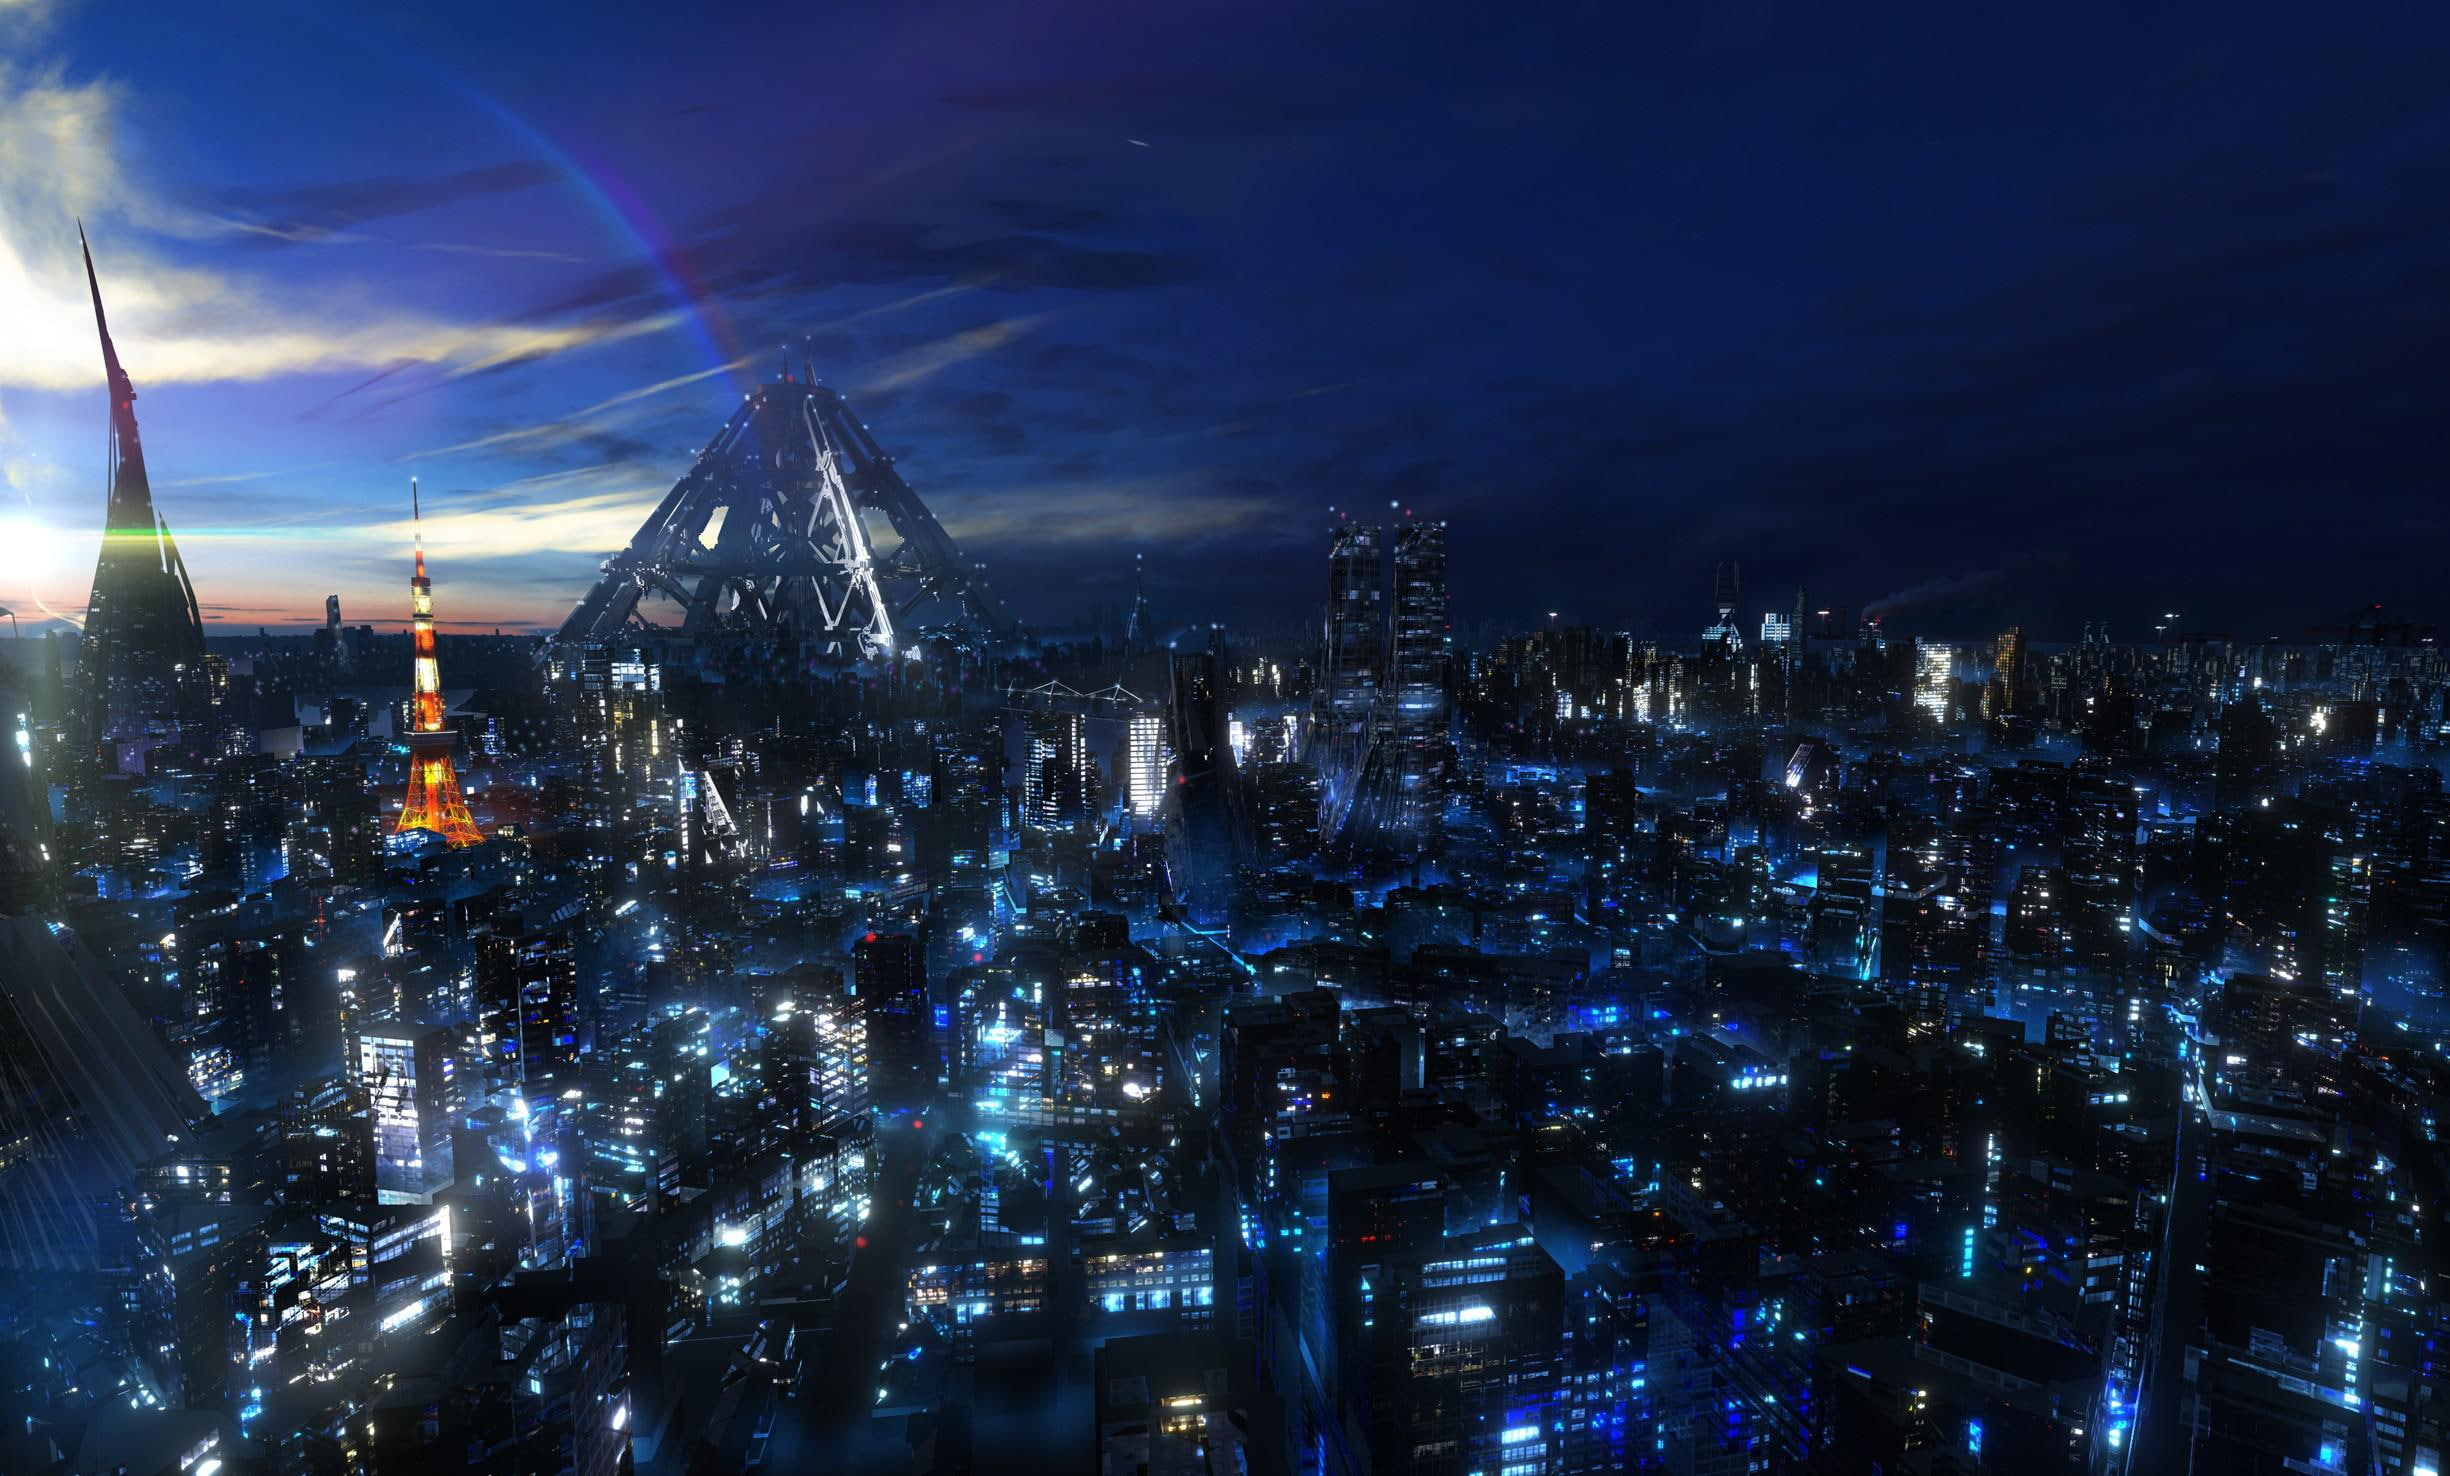 Japan Clouds Cityscapes Night Digital Art Skyscapes Guilty Crown Image Download